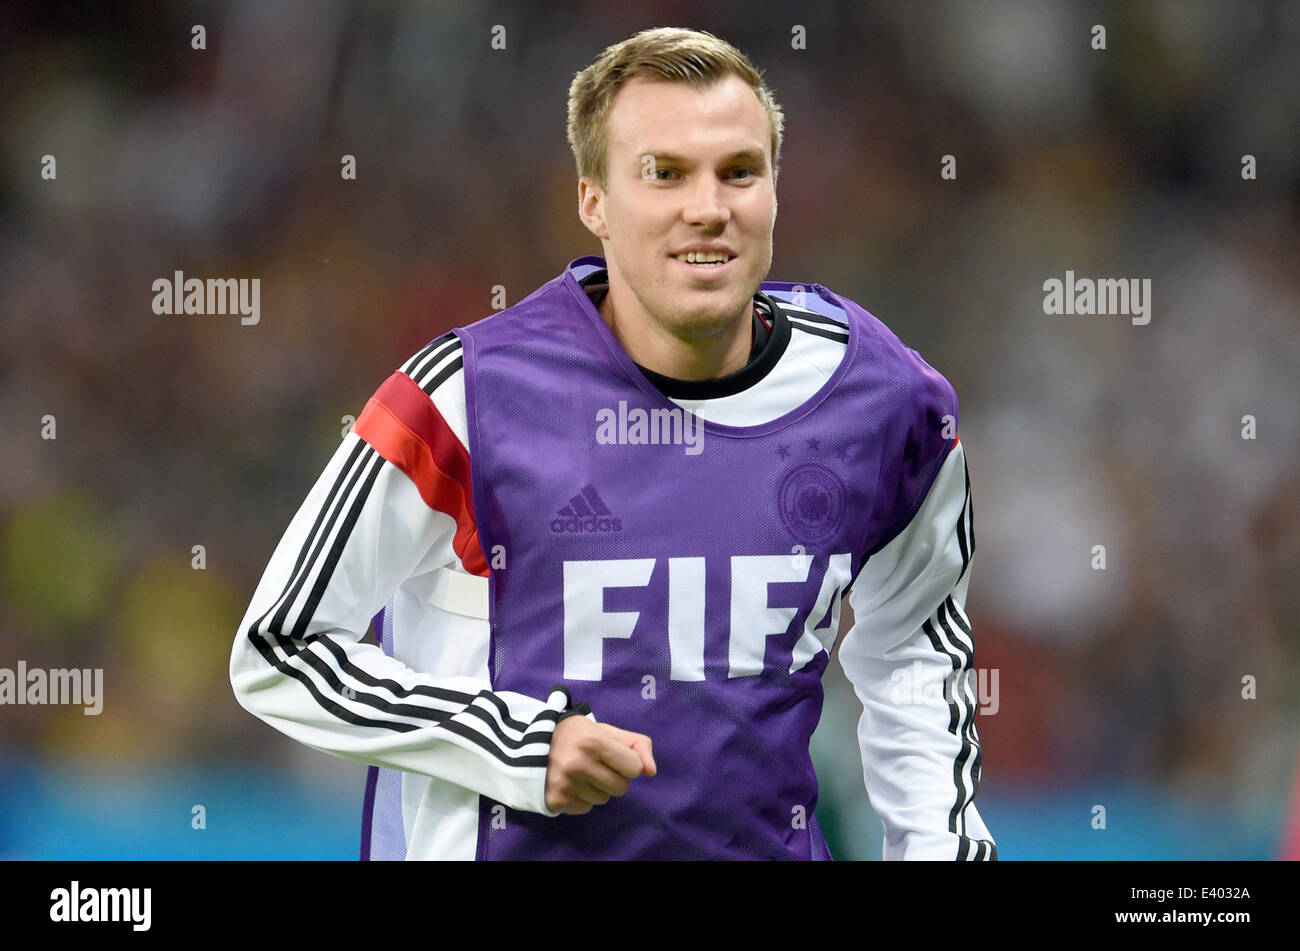 Porto Alegre, Brazil. 30th June, 2014. Kevin Grosskreutz of Germany warms up during the FIFA World Cup 2014 round of 16 soccer match between Germany and Algeria at the Estadio Beira-Rio in Porto Alegre, Brazil, 30 June 2014. Photo: Andreas Gebert/dpa/Alamy Live News Stock Photo